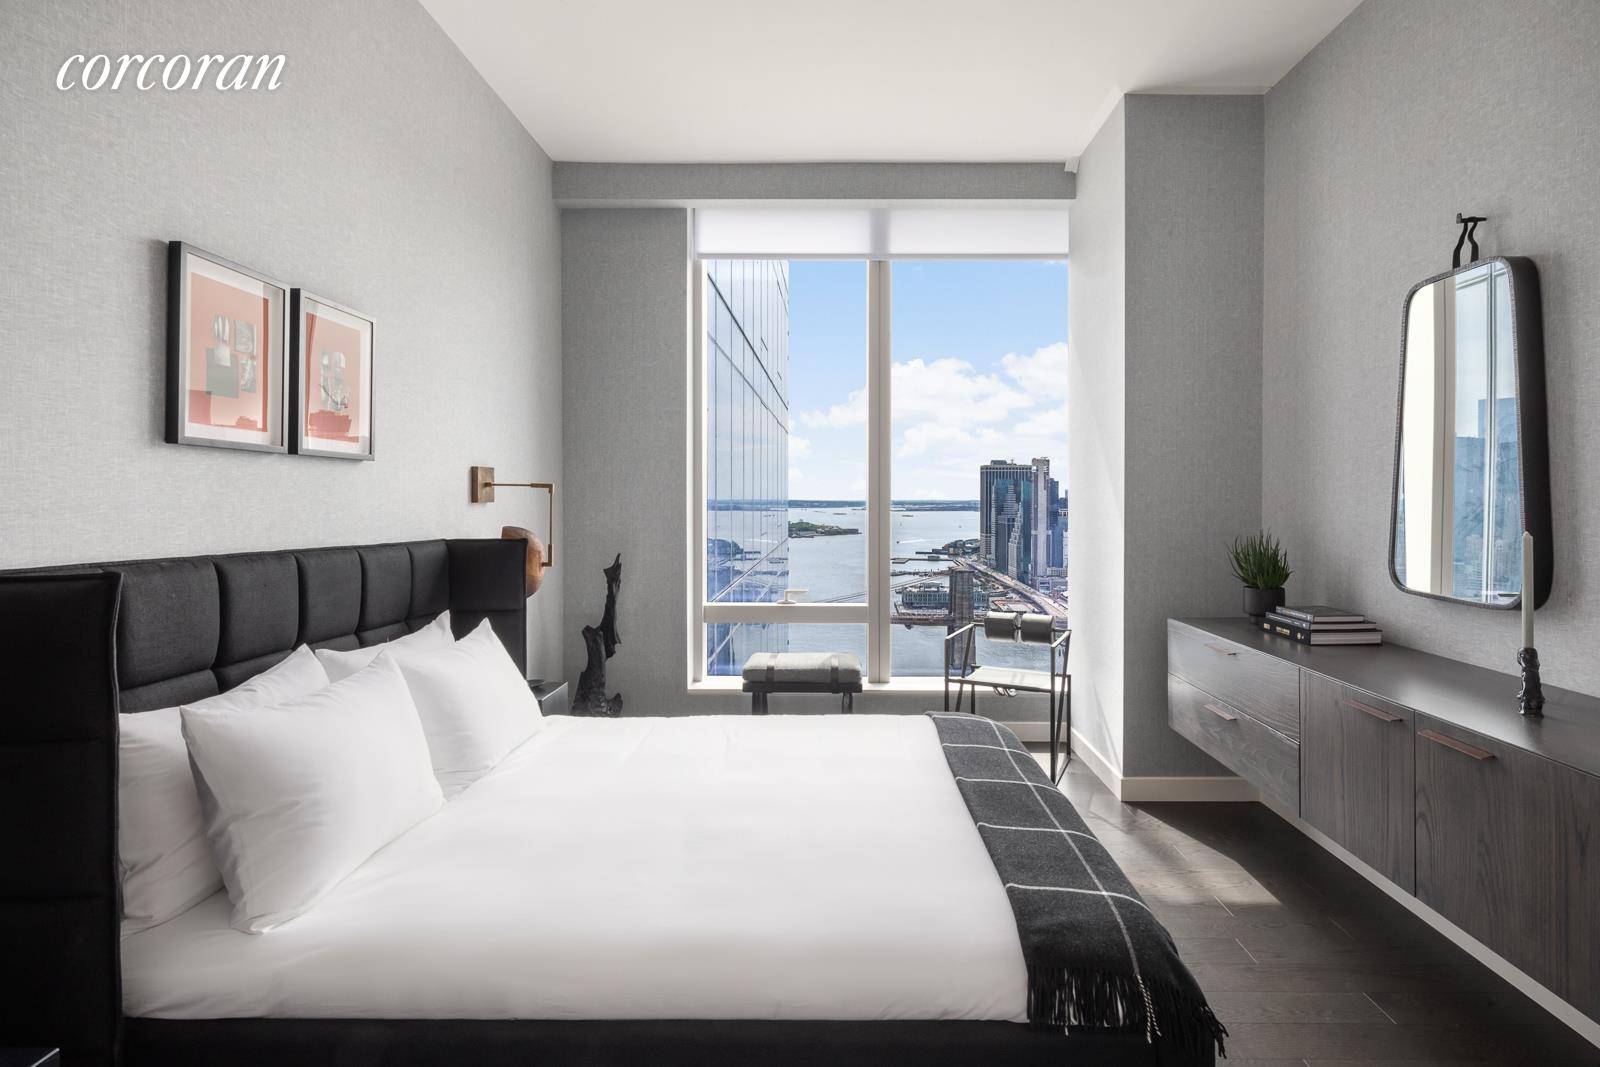 ONE MANHATTAN SQUARE OFFERS ONE OF THE LAST 20 YEAR TAX ABATEMENTS AVAILABLE IN NEW YORK CITY Residence 60L is a 709 square foot one bedroom, one bathroom with an ...